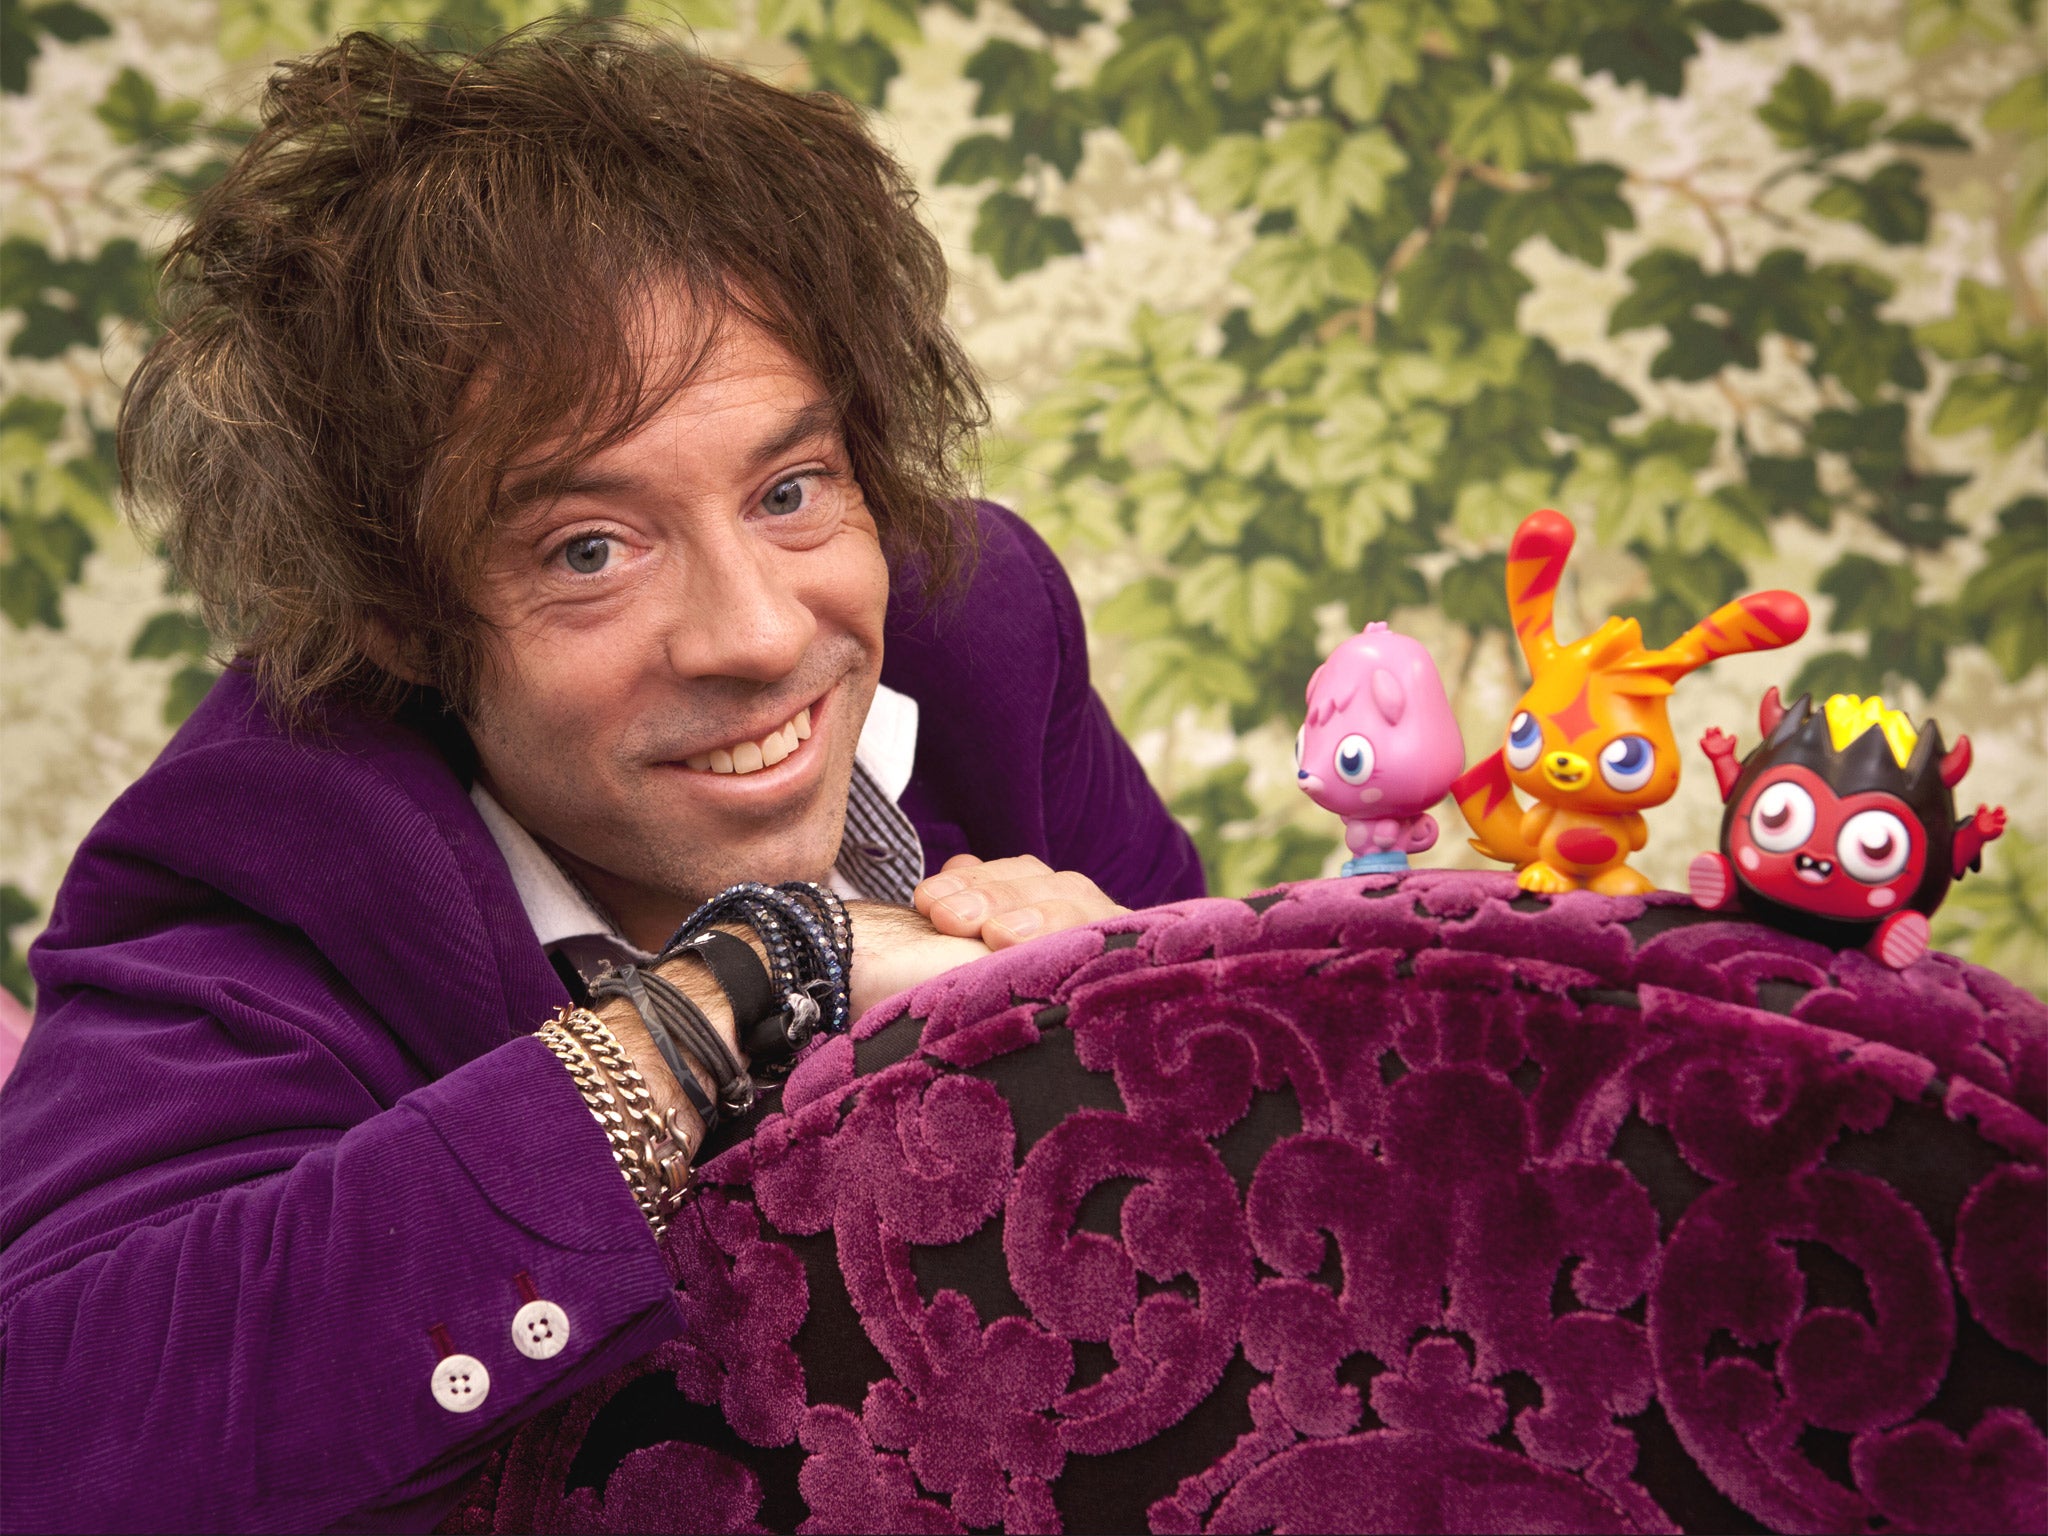 Michael Acton Smith founded Firebox straight out of university before creating Moshi Monsters